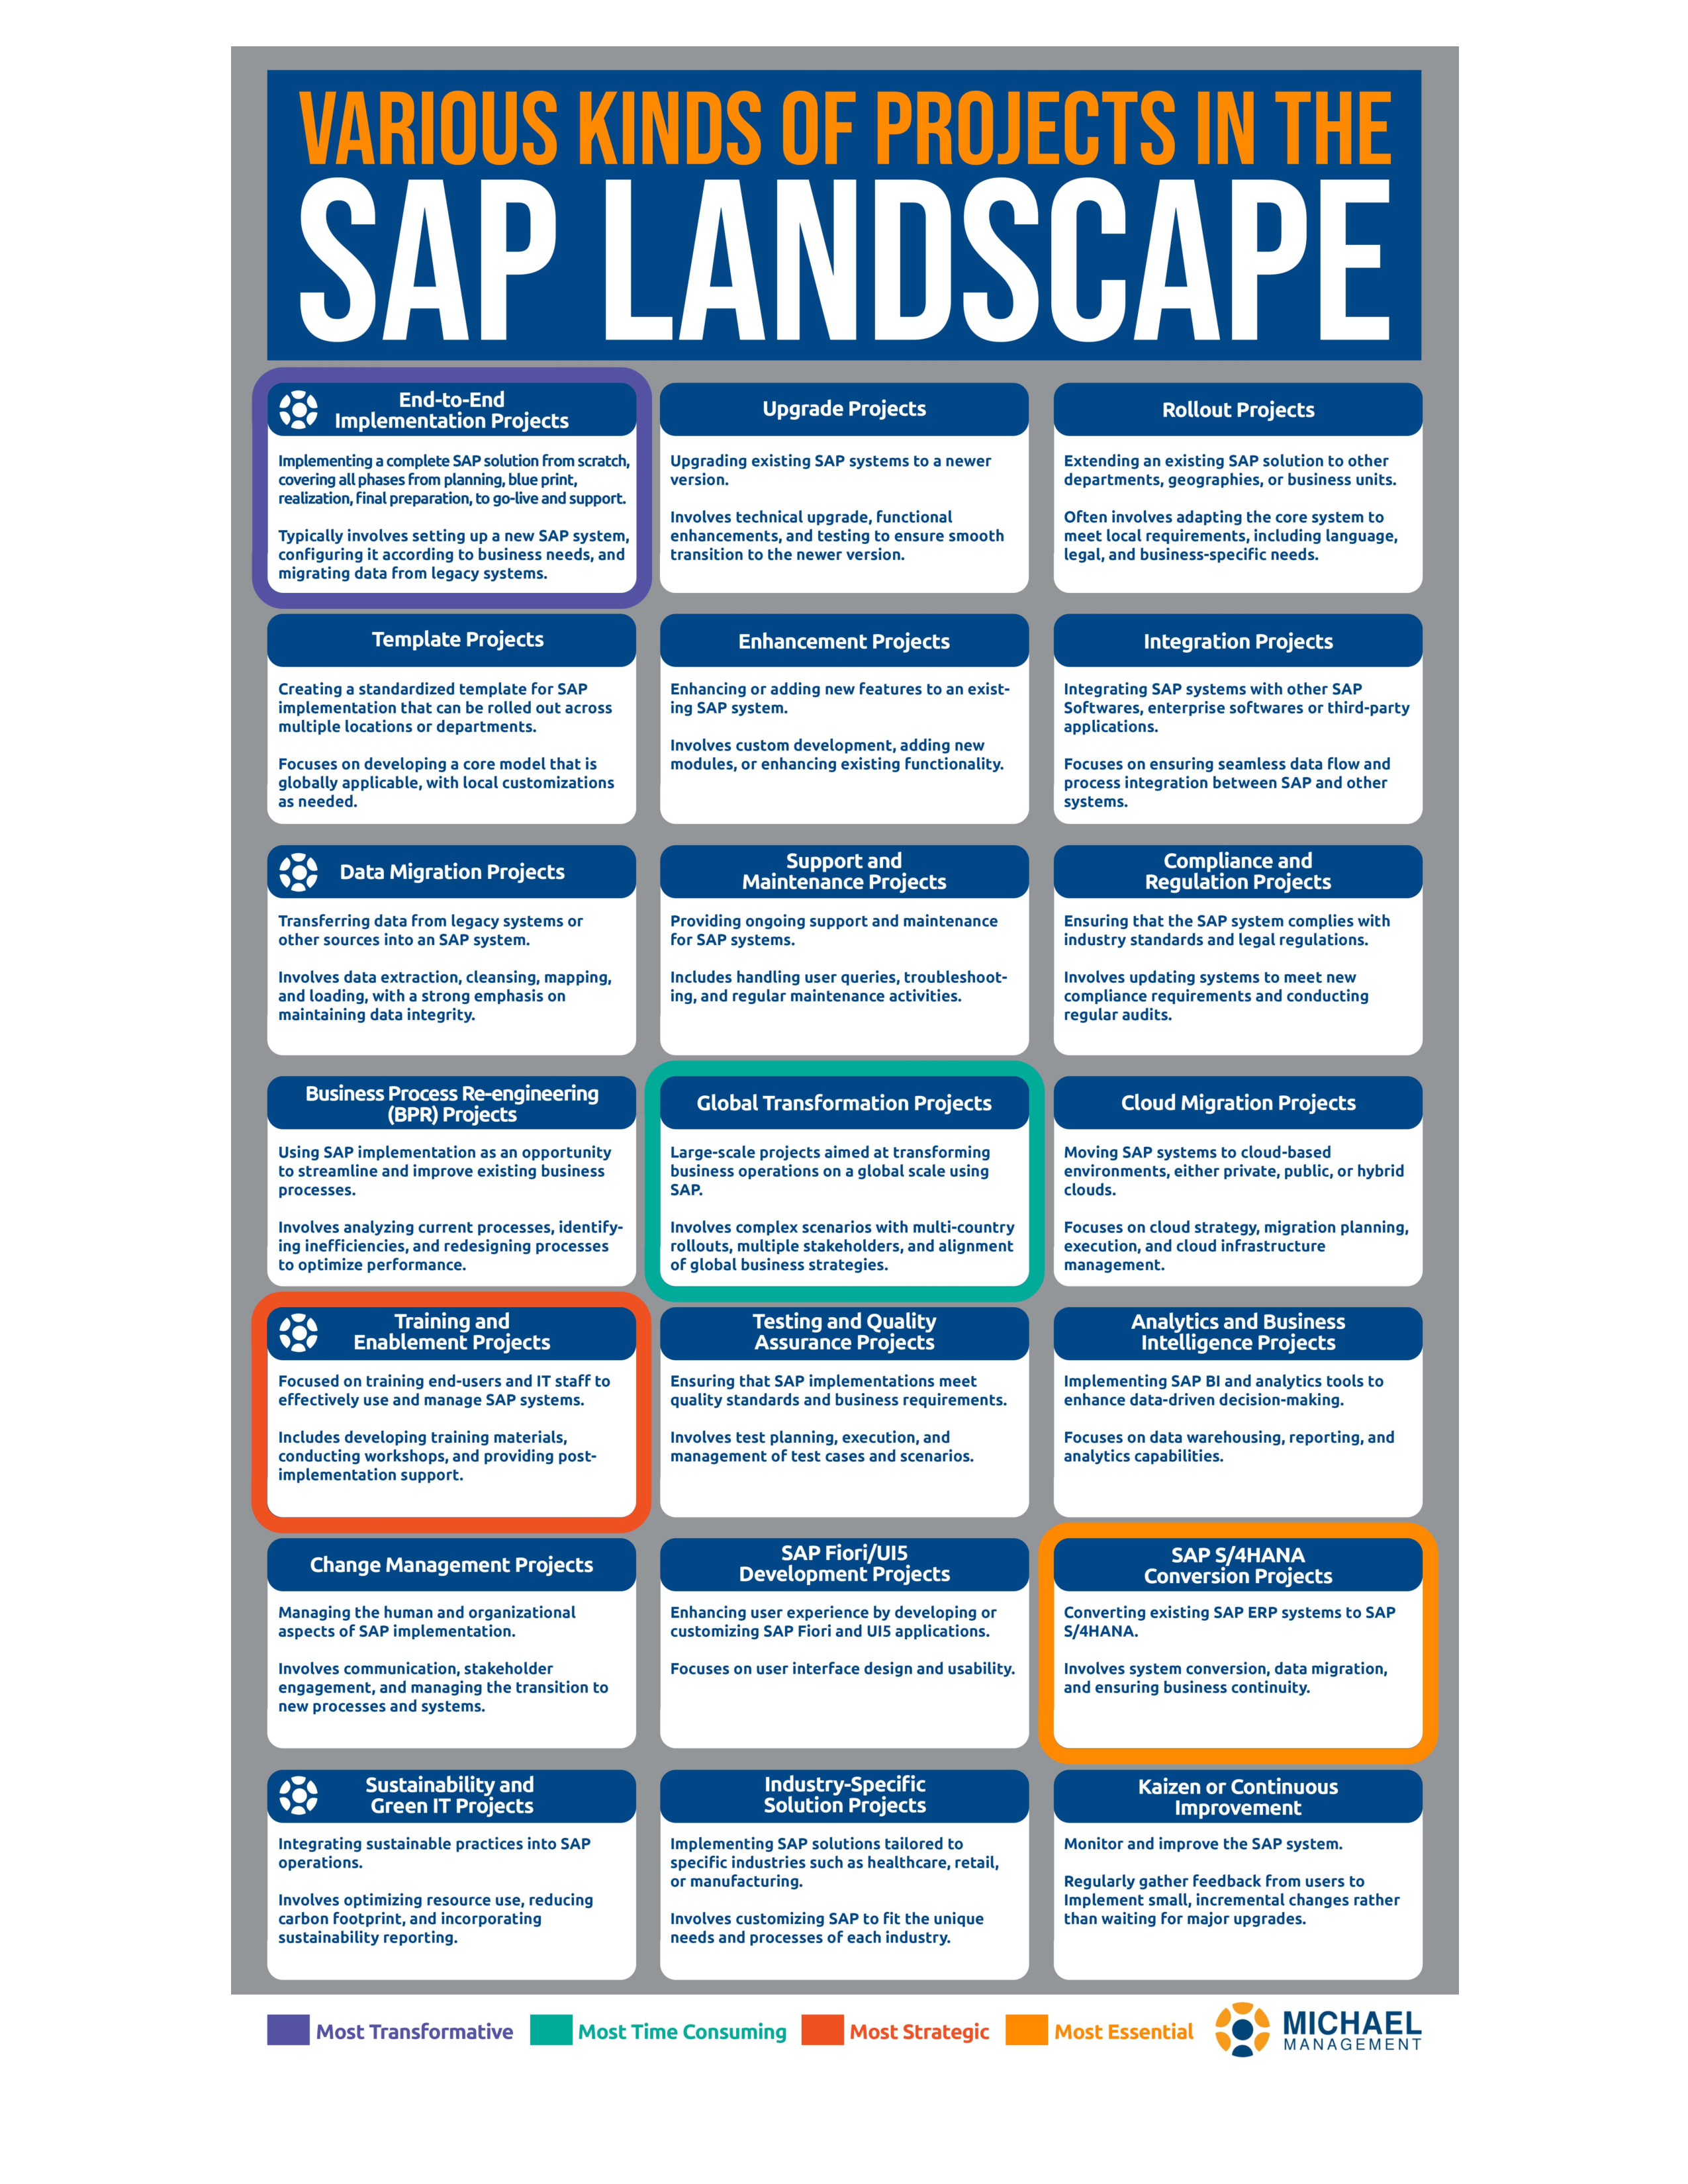 Types of Projects in the SAP Landscape